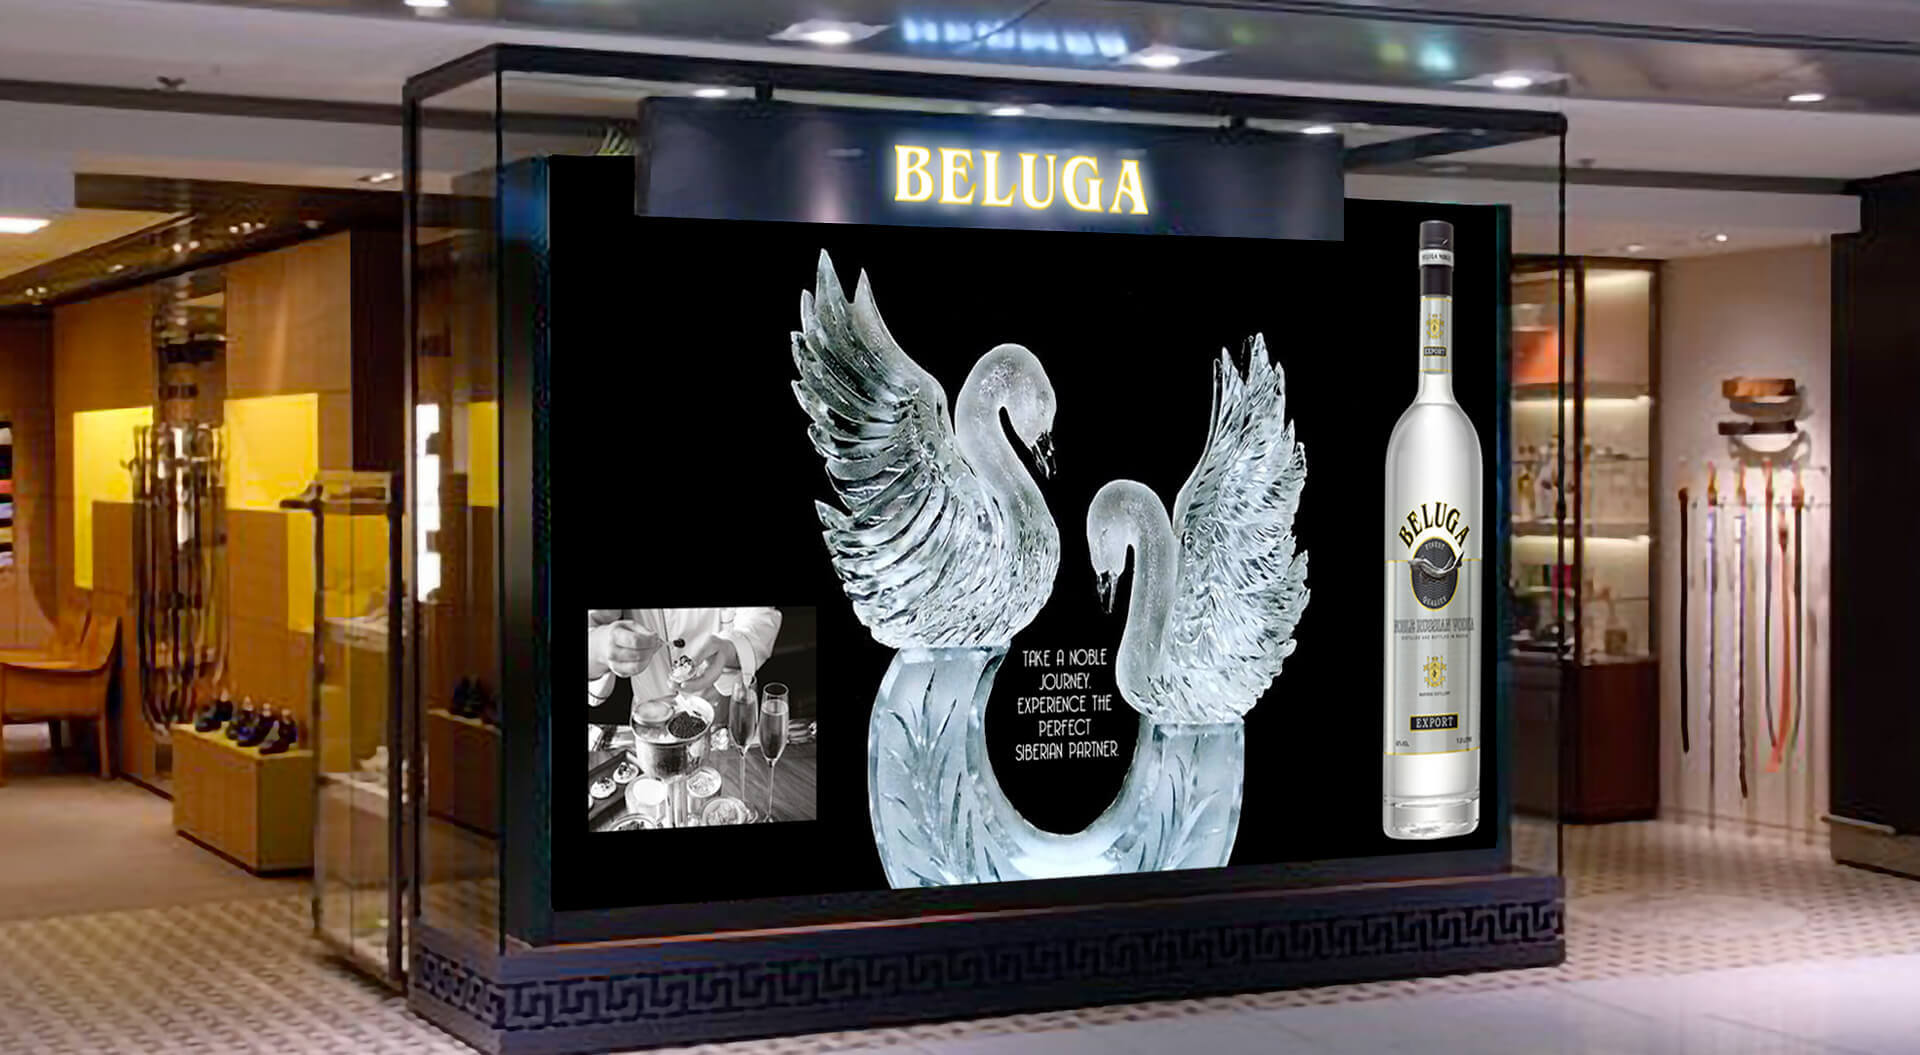 Beluga Vodka Russia, Connecting drinks industry brands to audiences, Experiential & Disruptive Graphic Design & Communications - CampbellRigg Agency